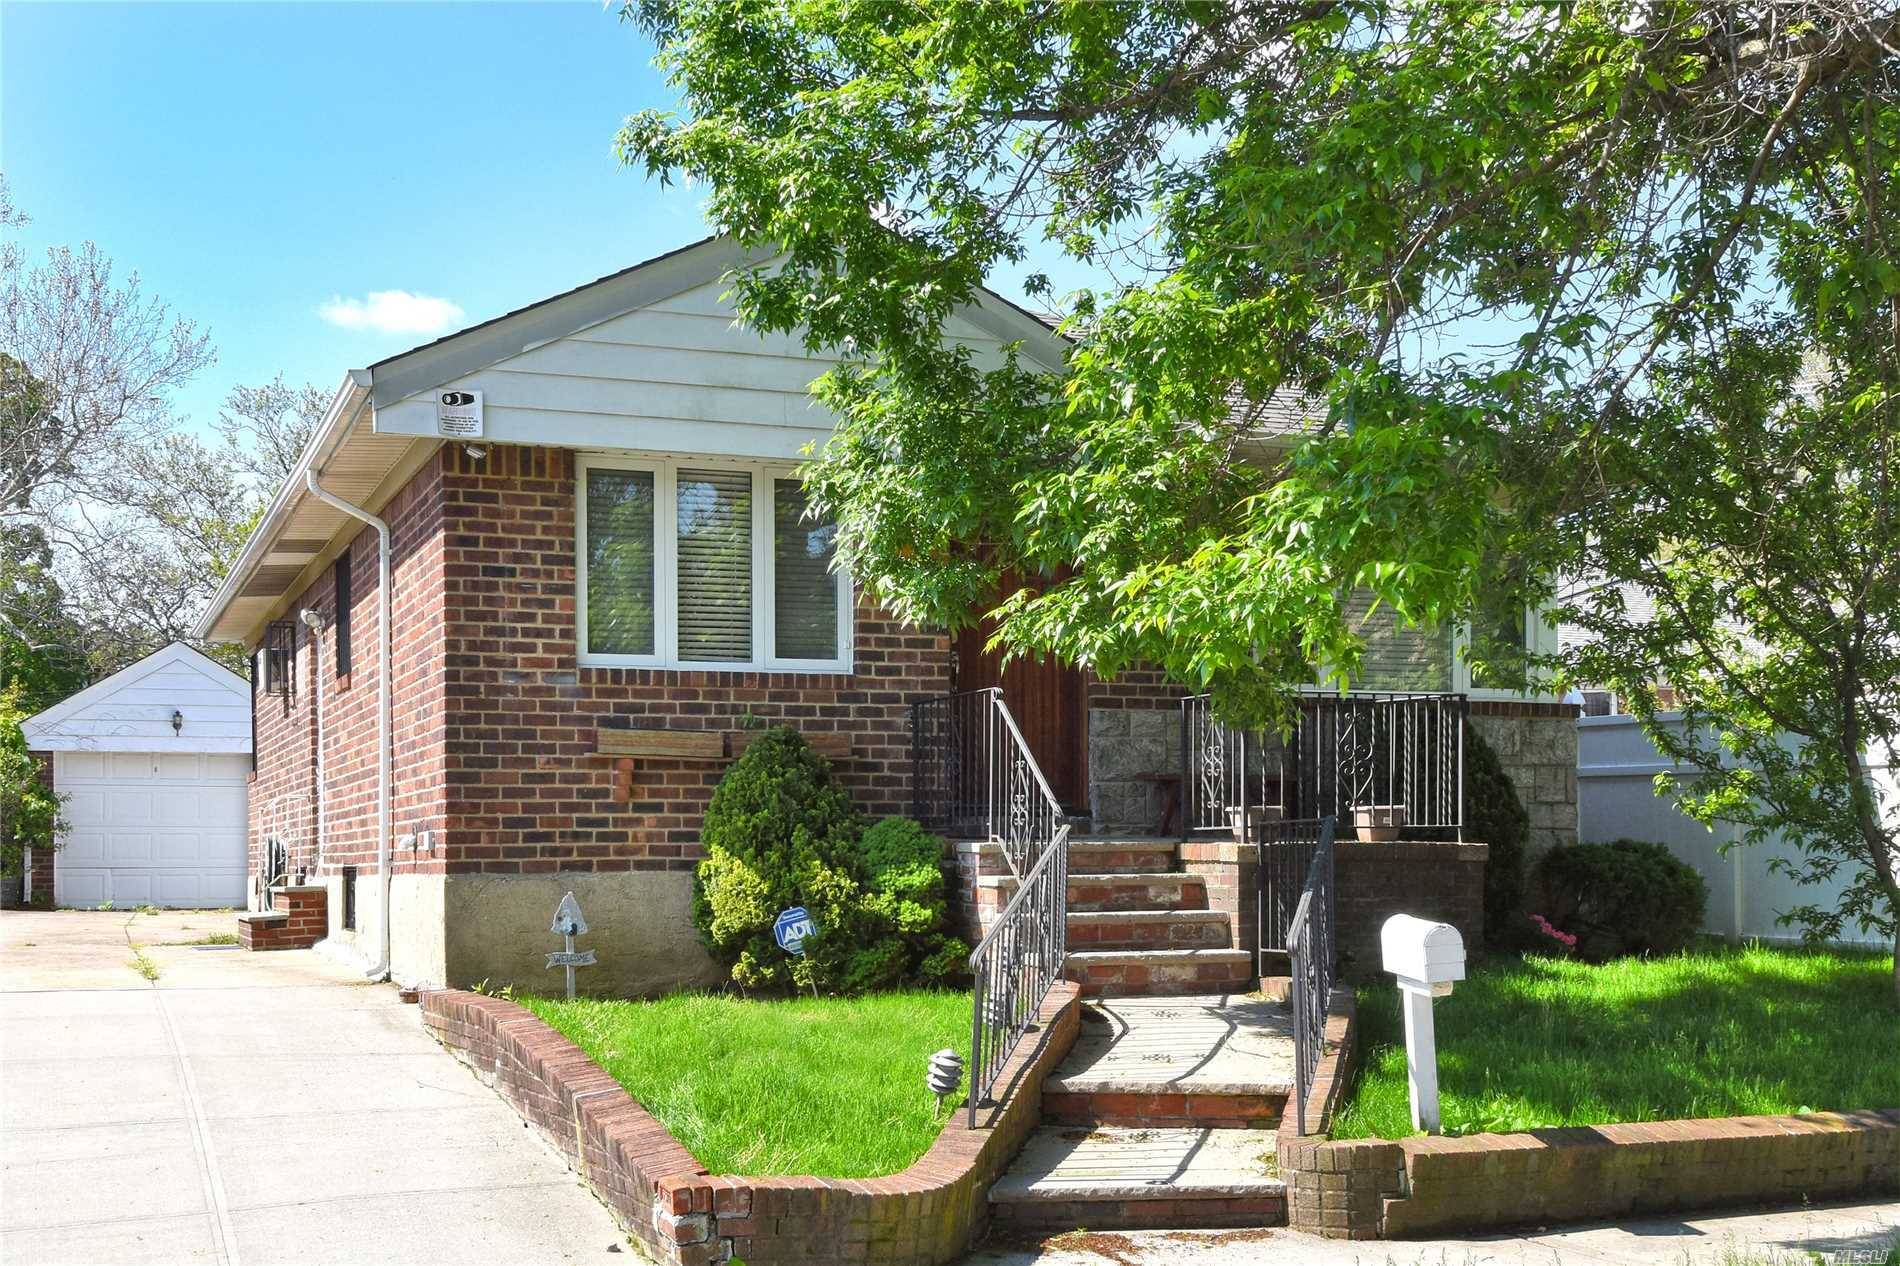 Step Into This Fully Renovated Home Located In The Prime Section Of Fresh Meadows.